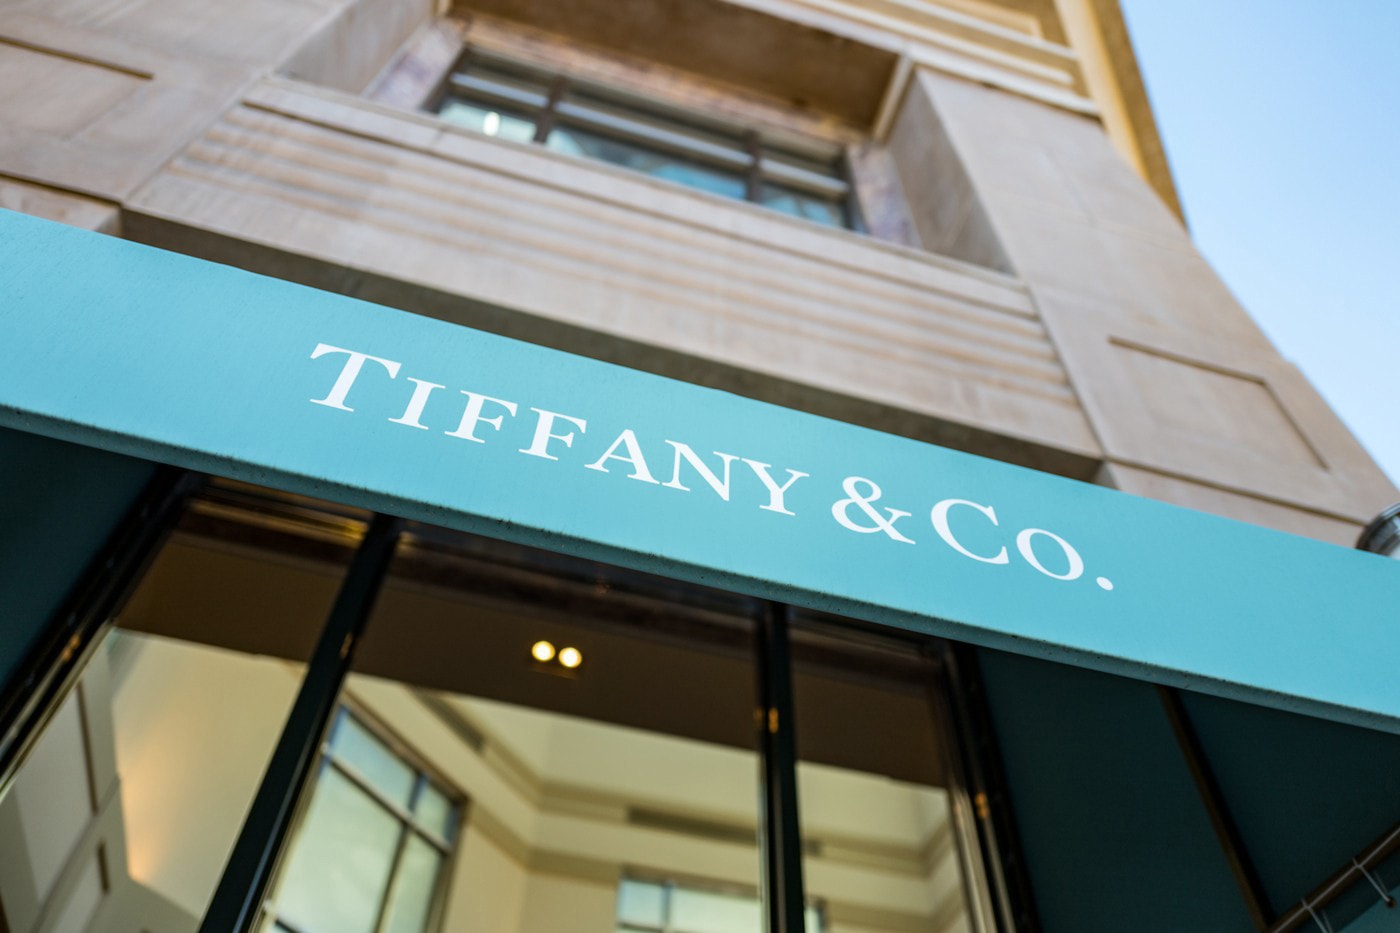 tiffany jewelry lvmh conglomerate bernard arnault acquisition merger details price information deal